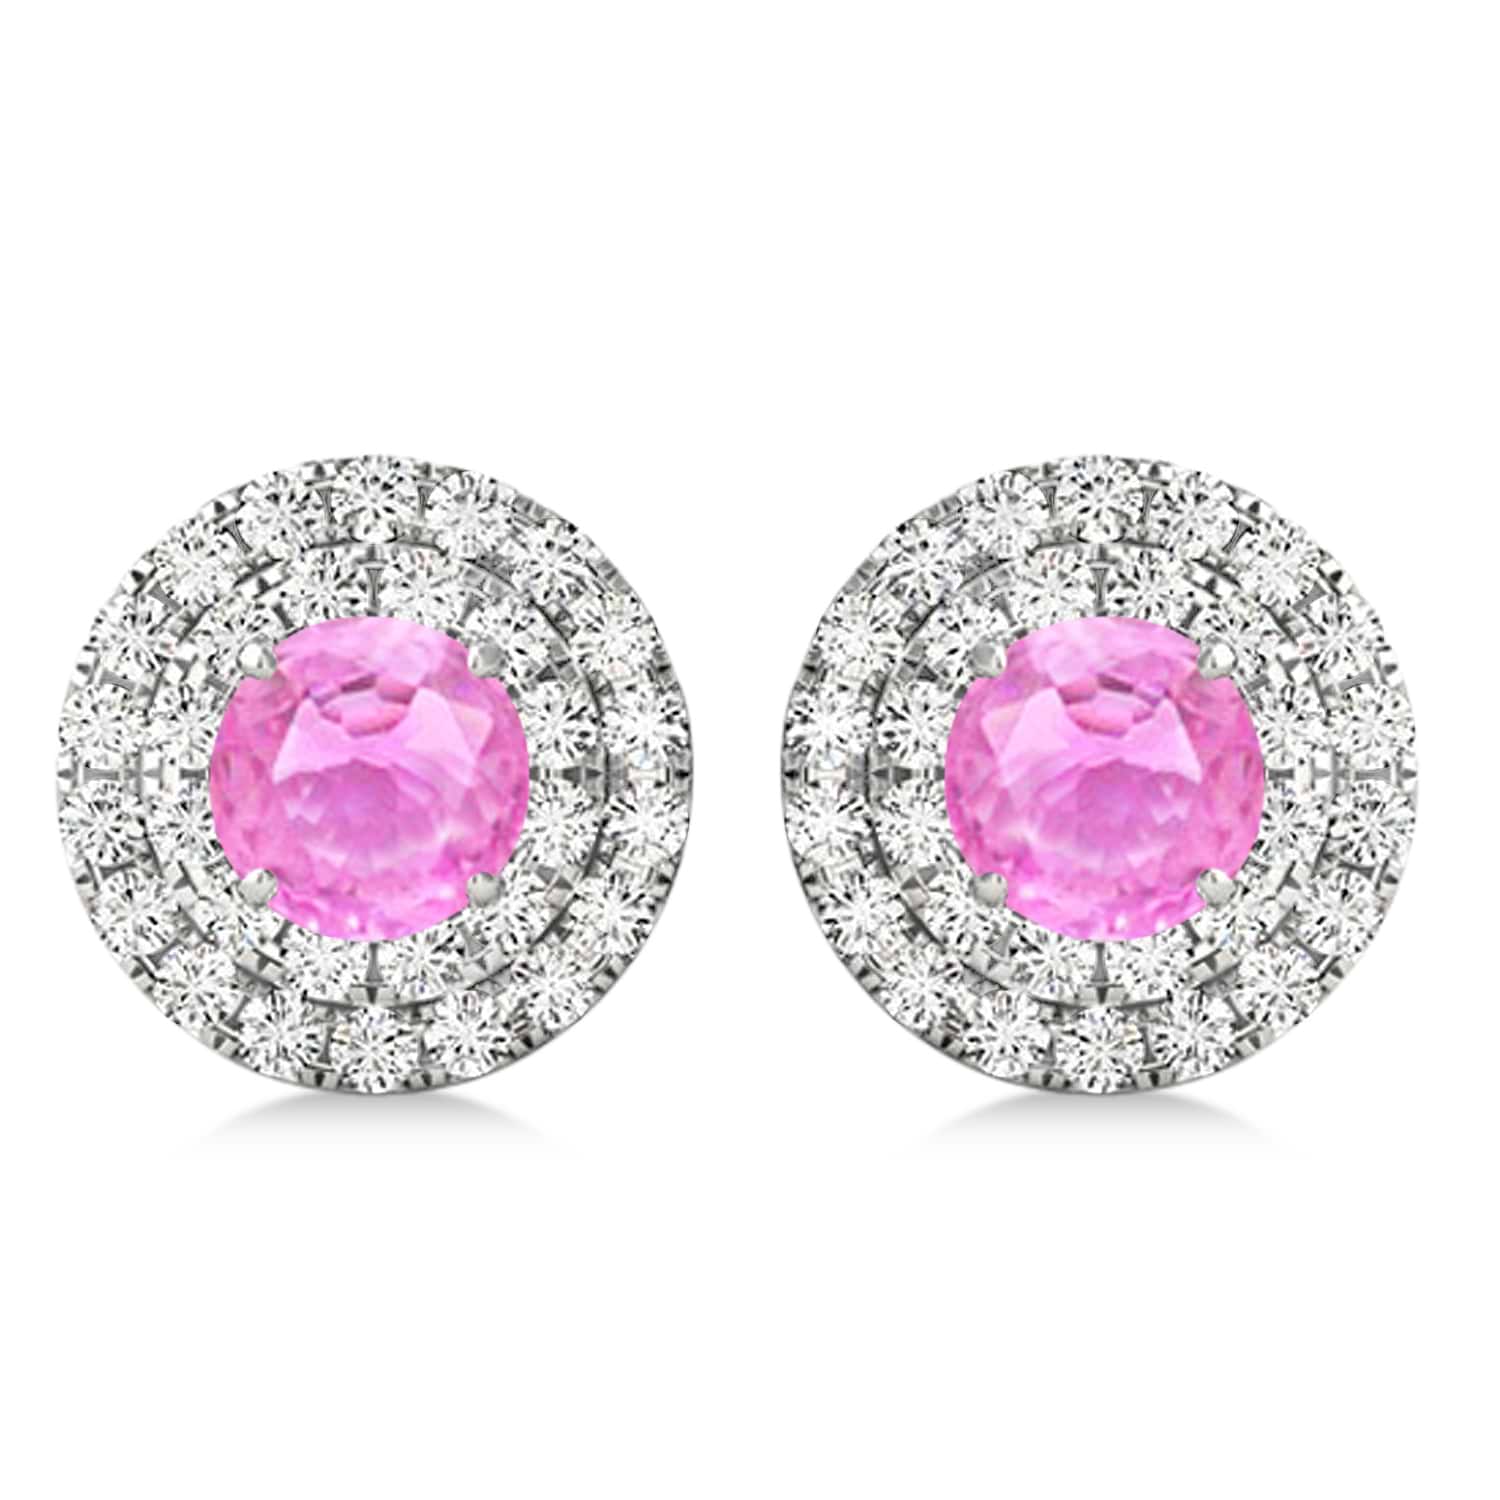 Round Double Halo Diamond & Pink Sapphire Earrings 14k White Gold 1.65ct